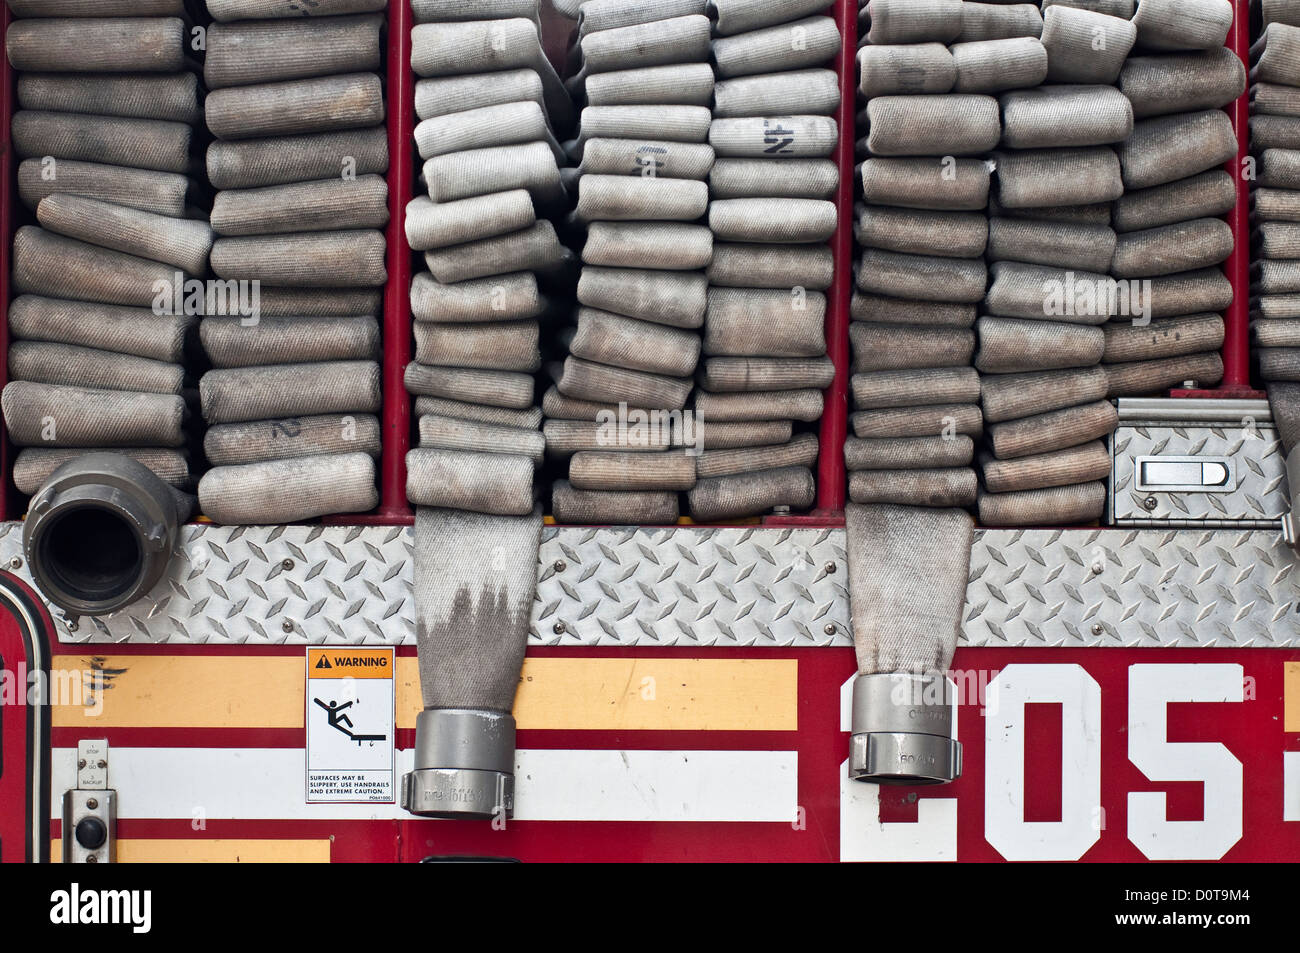 Hoses neatly loaded in the back of a FDNY firetruck in Brooklyn, NYC. Stock Photo